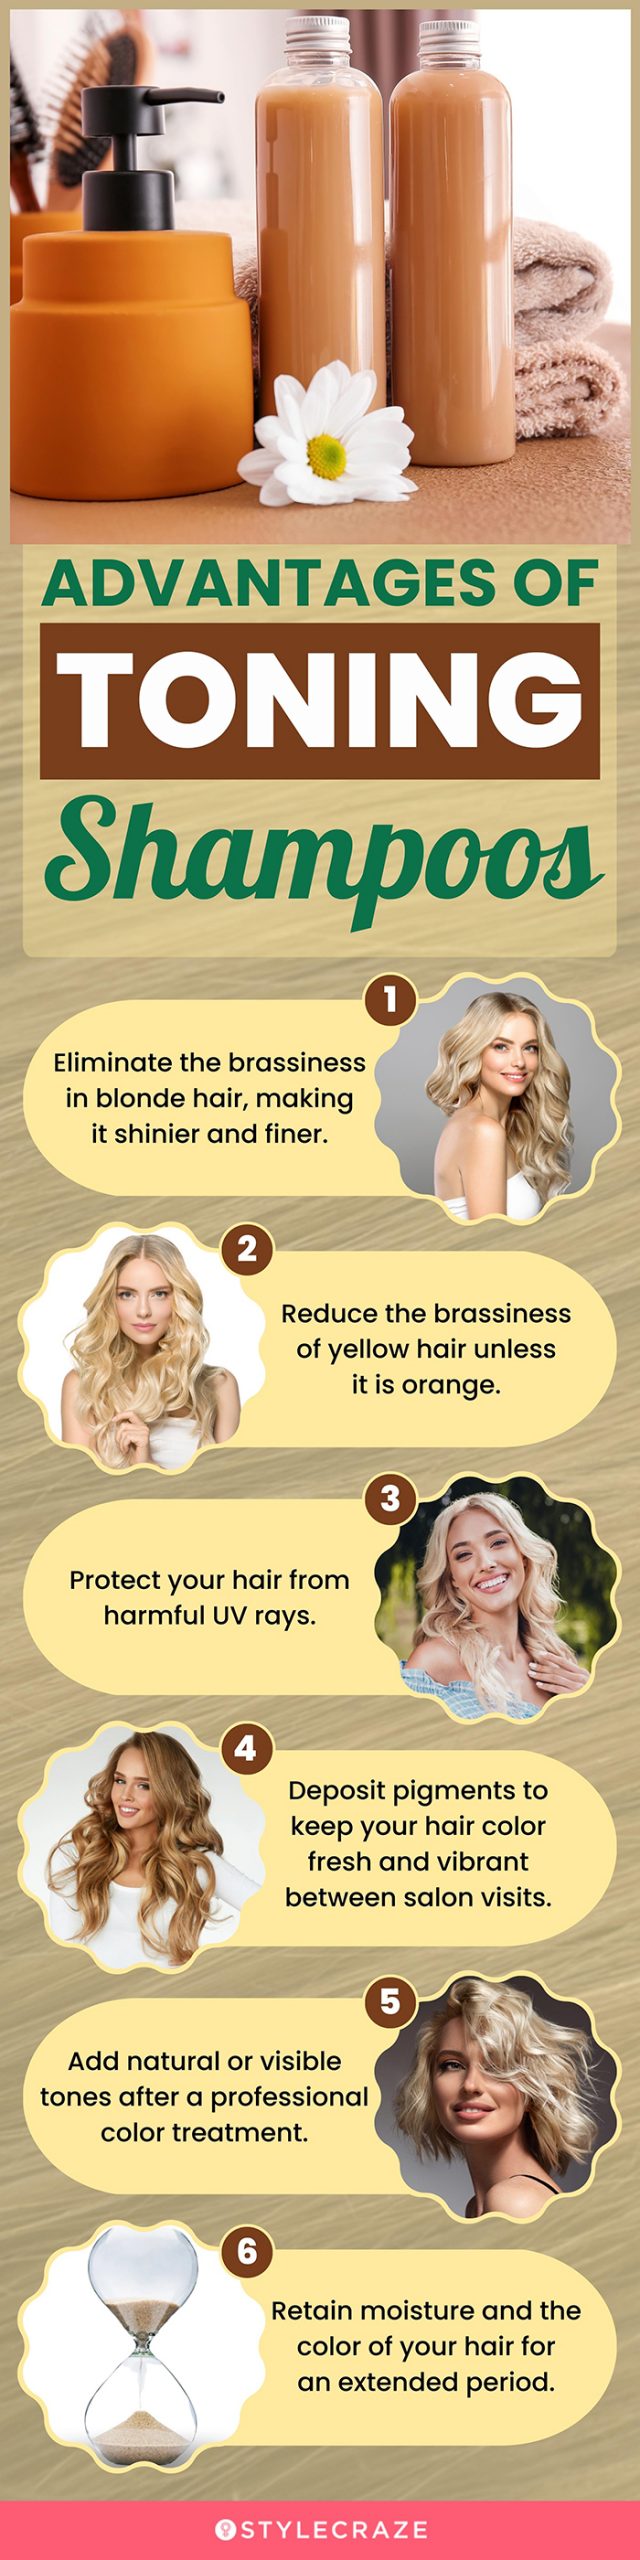 Advantages Of Toning Shampoos (infographic)